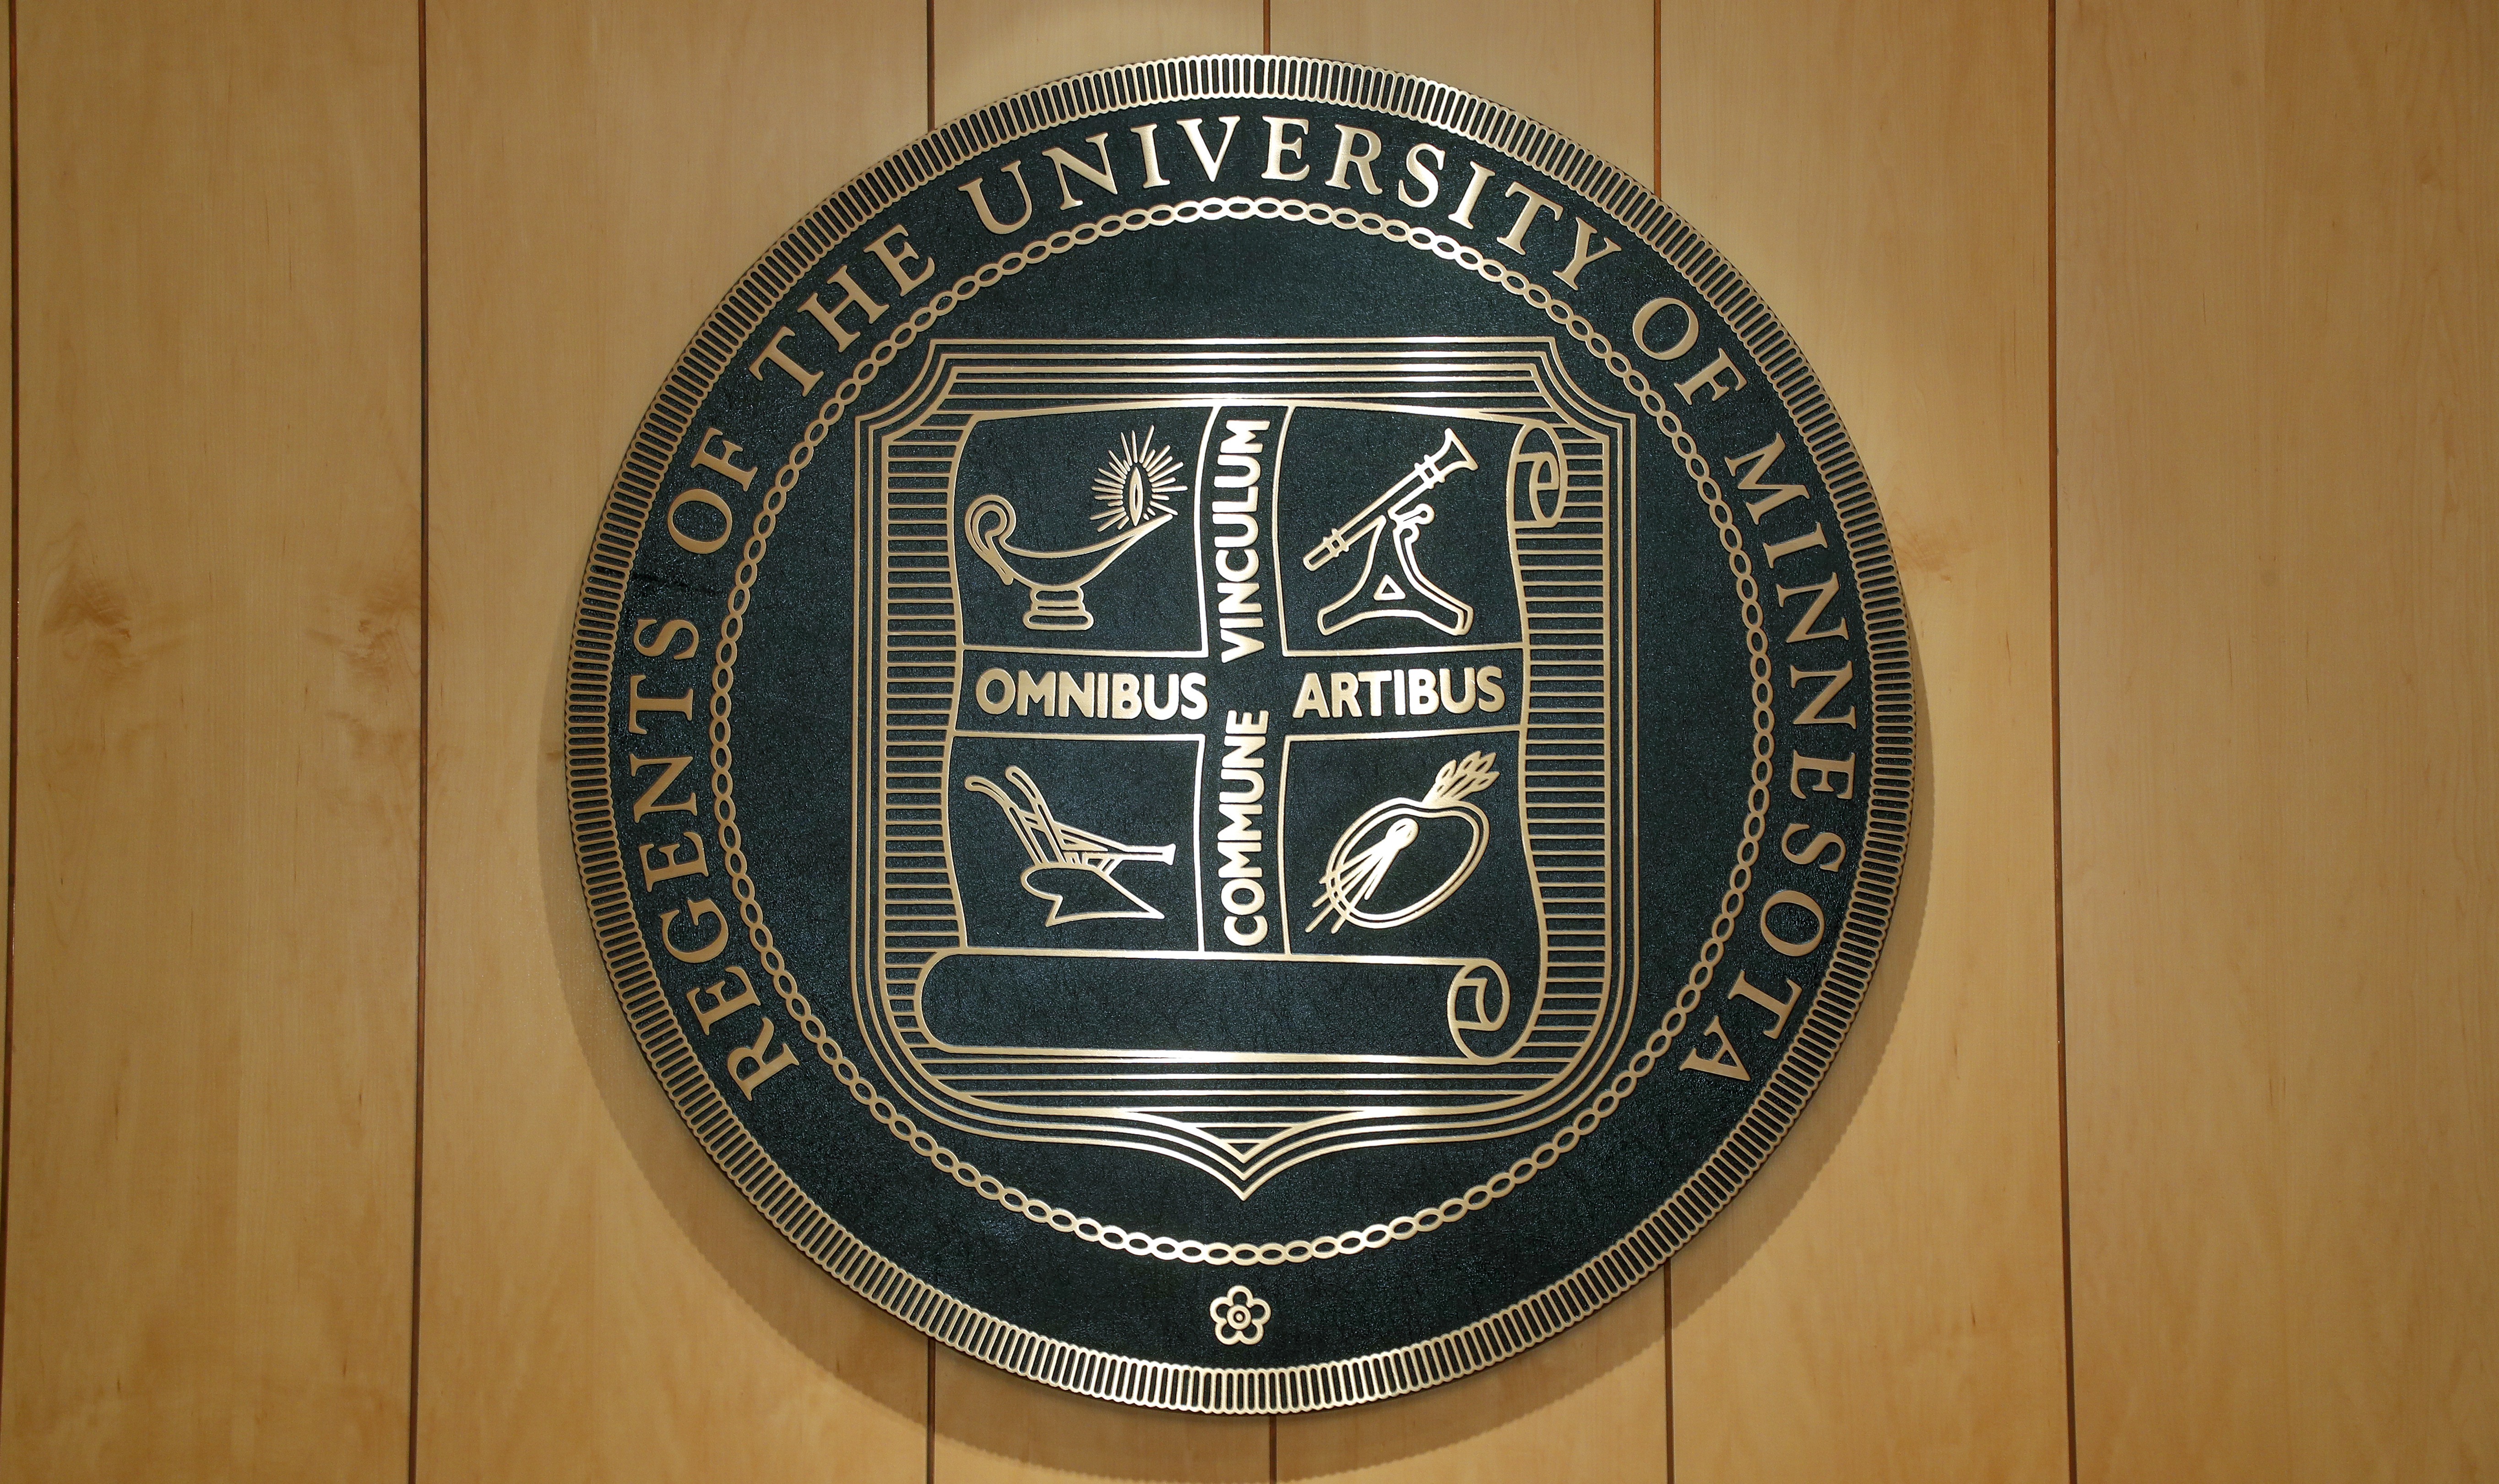 An image of a large, metallic regents seal hanging on a wood-panel wall.